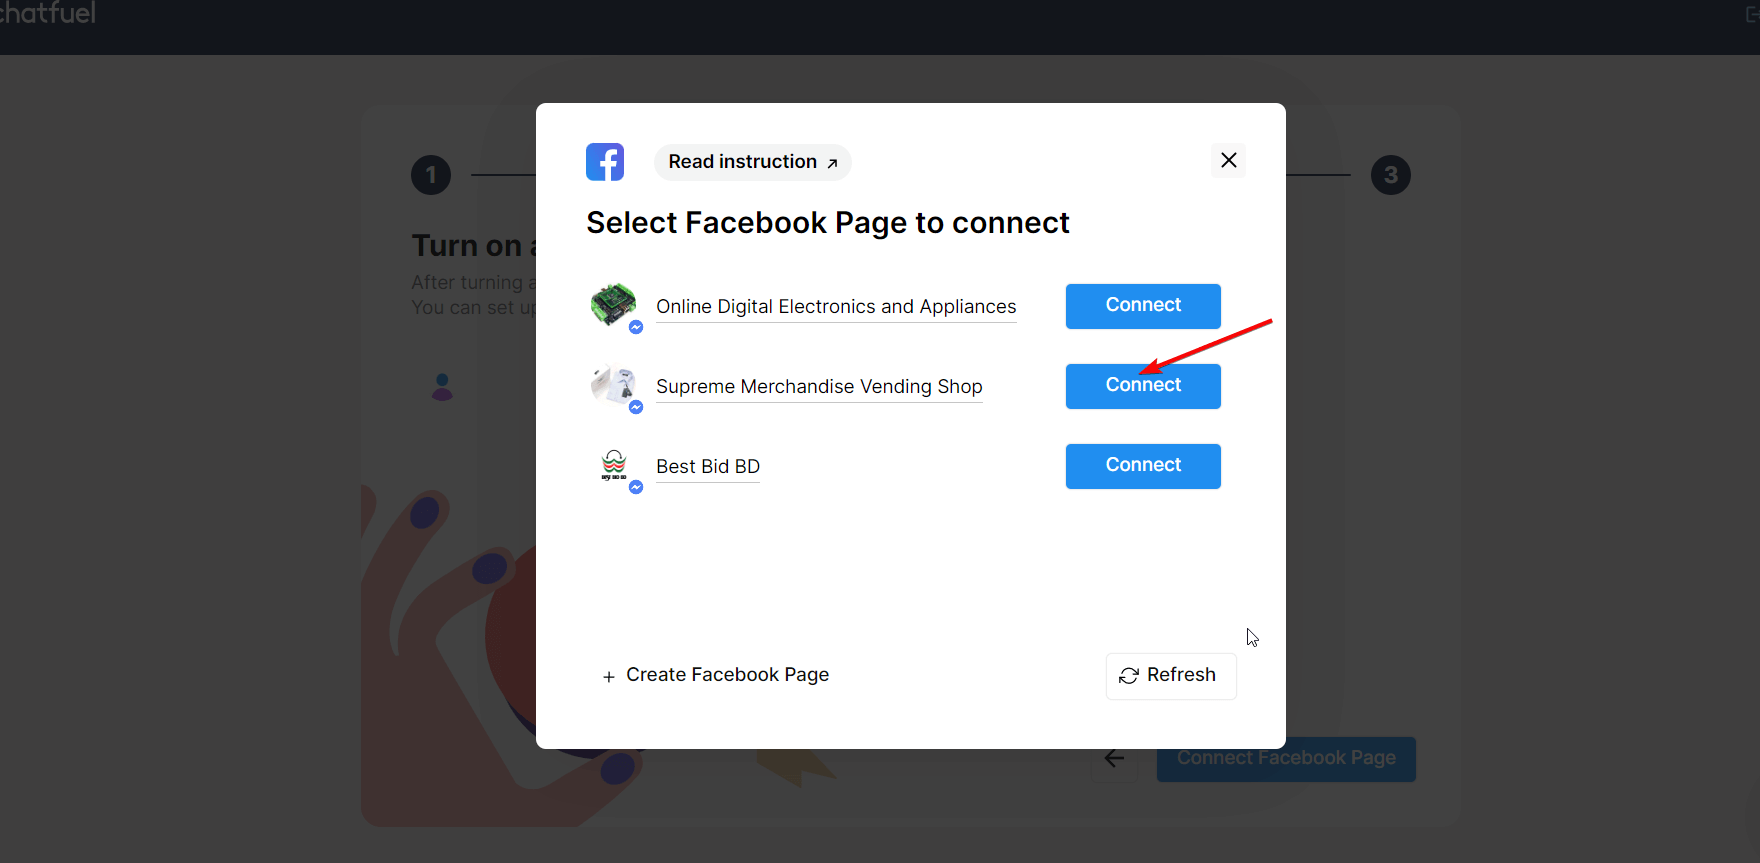 Select your Facebook page